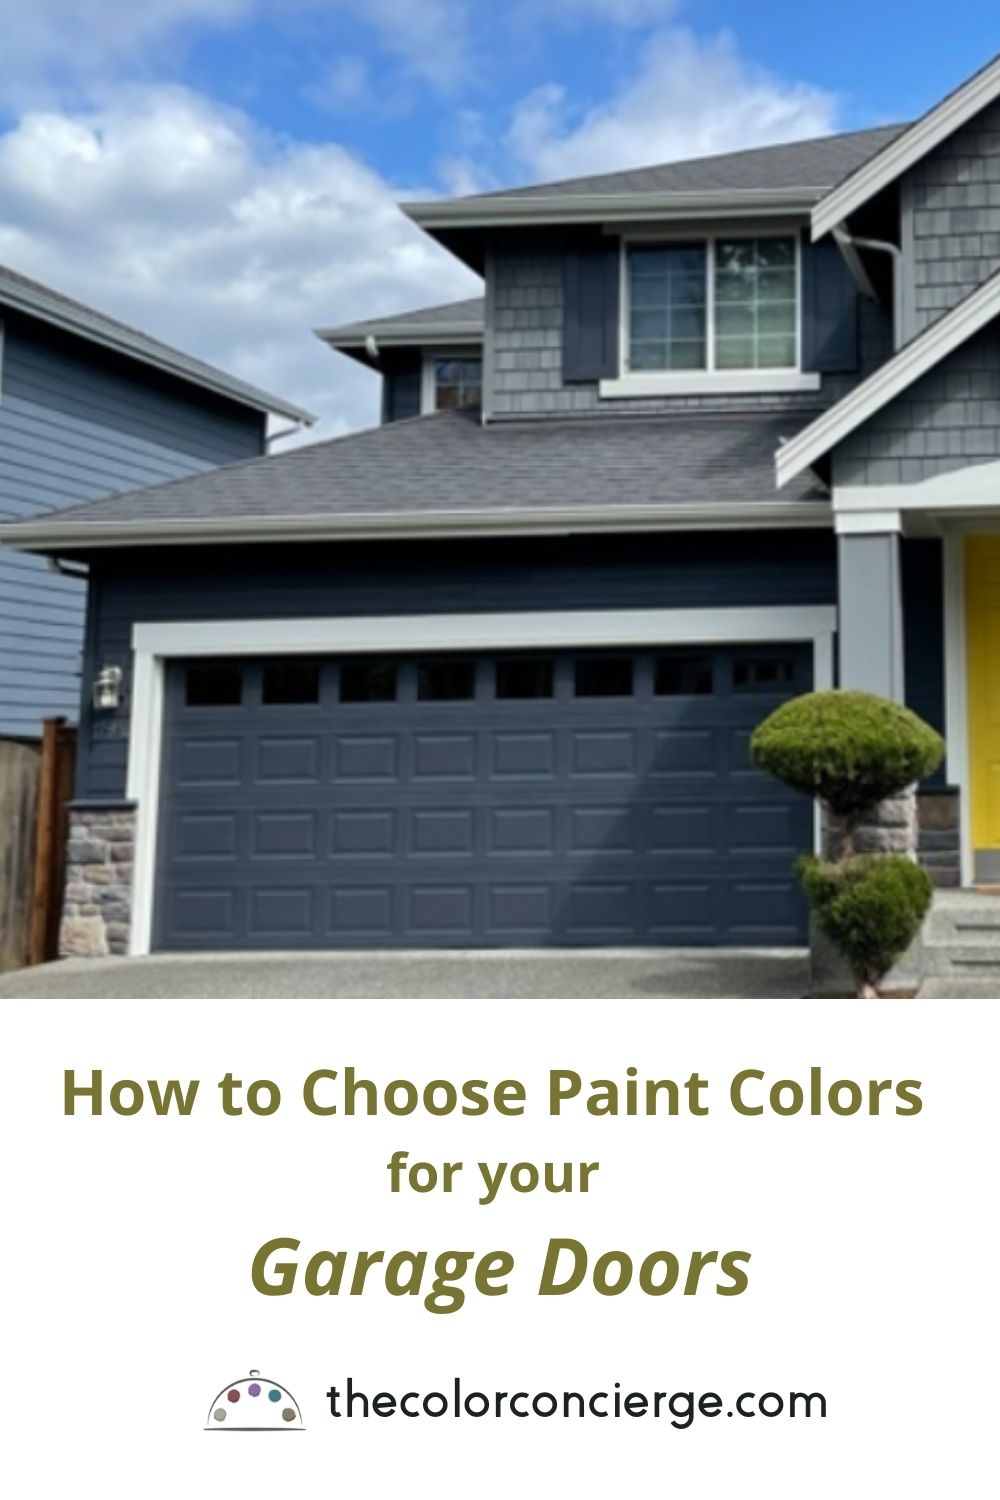 How to choose paint colors for your garage doors